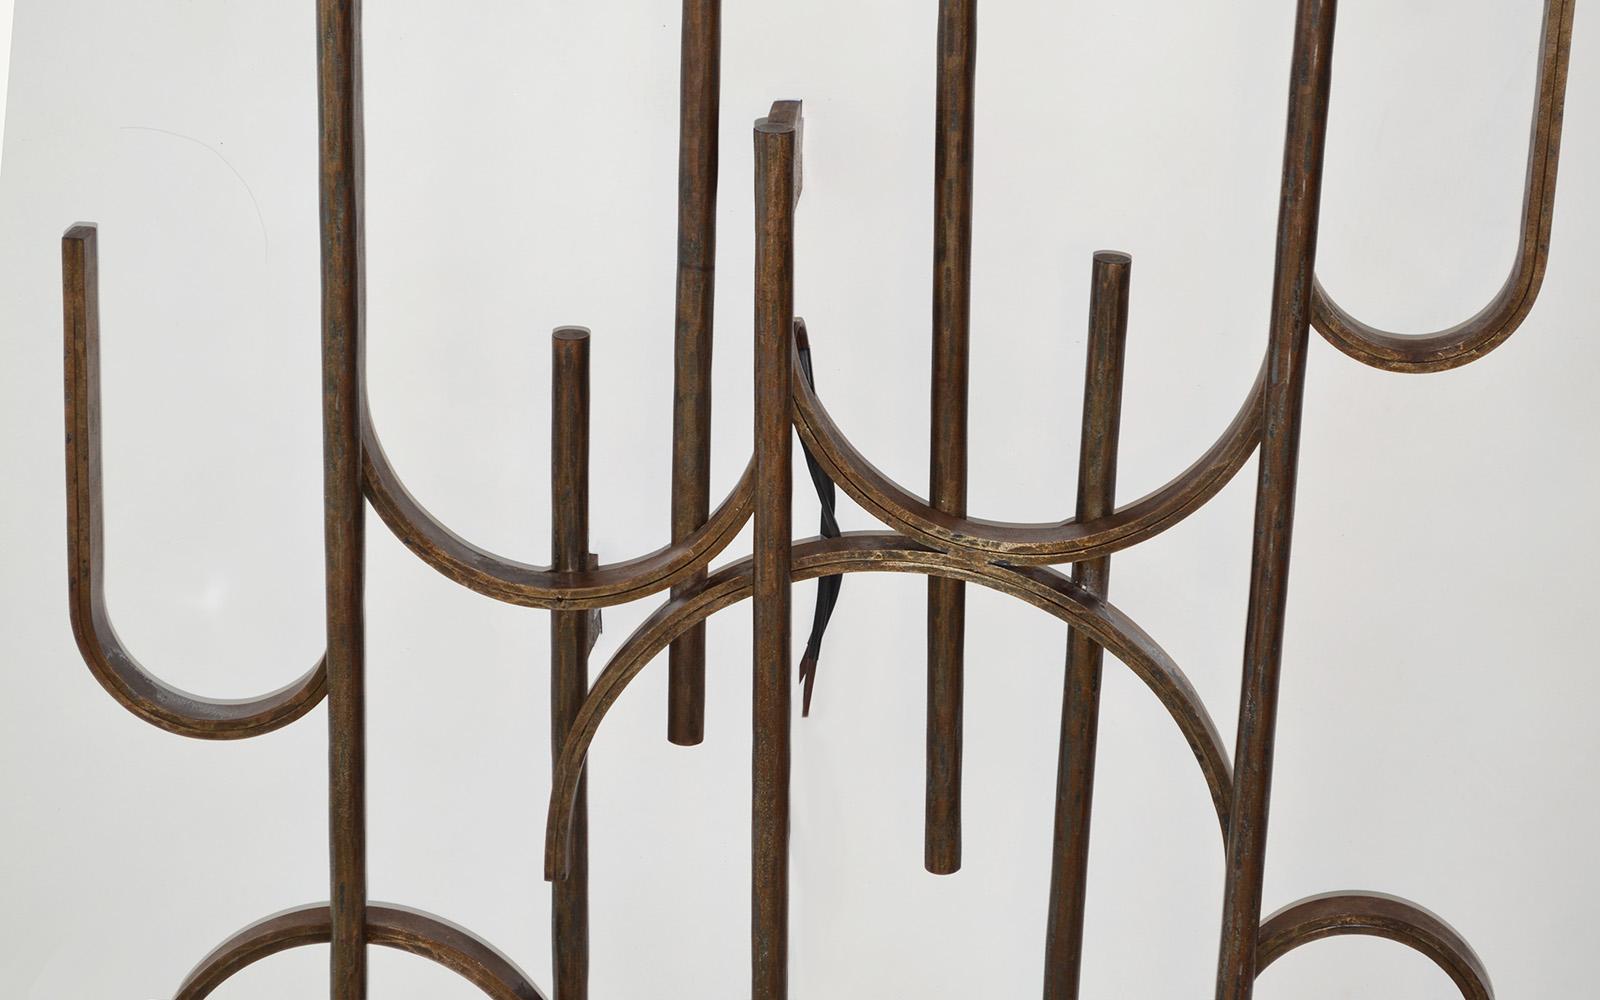 20th Century Pair of Wrought Iron Wall Sconces From a Miami Resort, Brutalist Deco MIMO For Sale